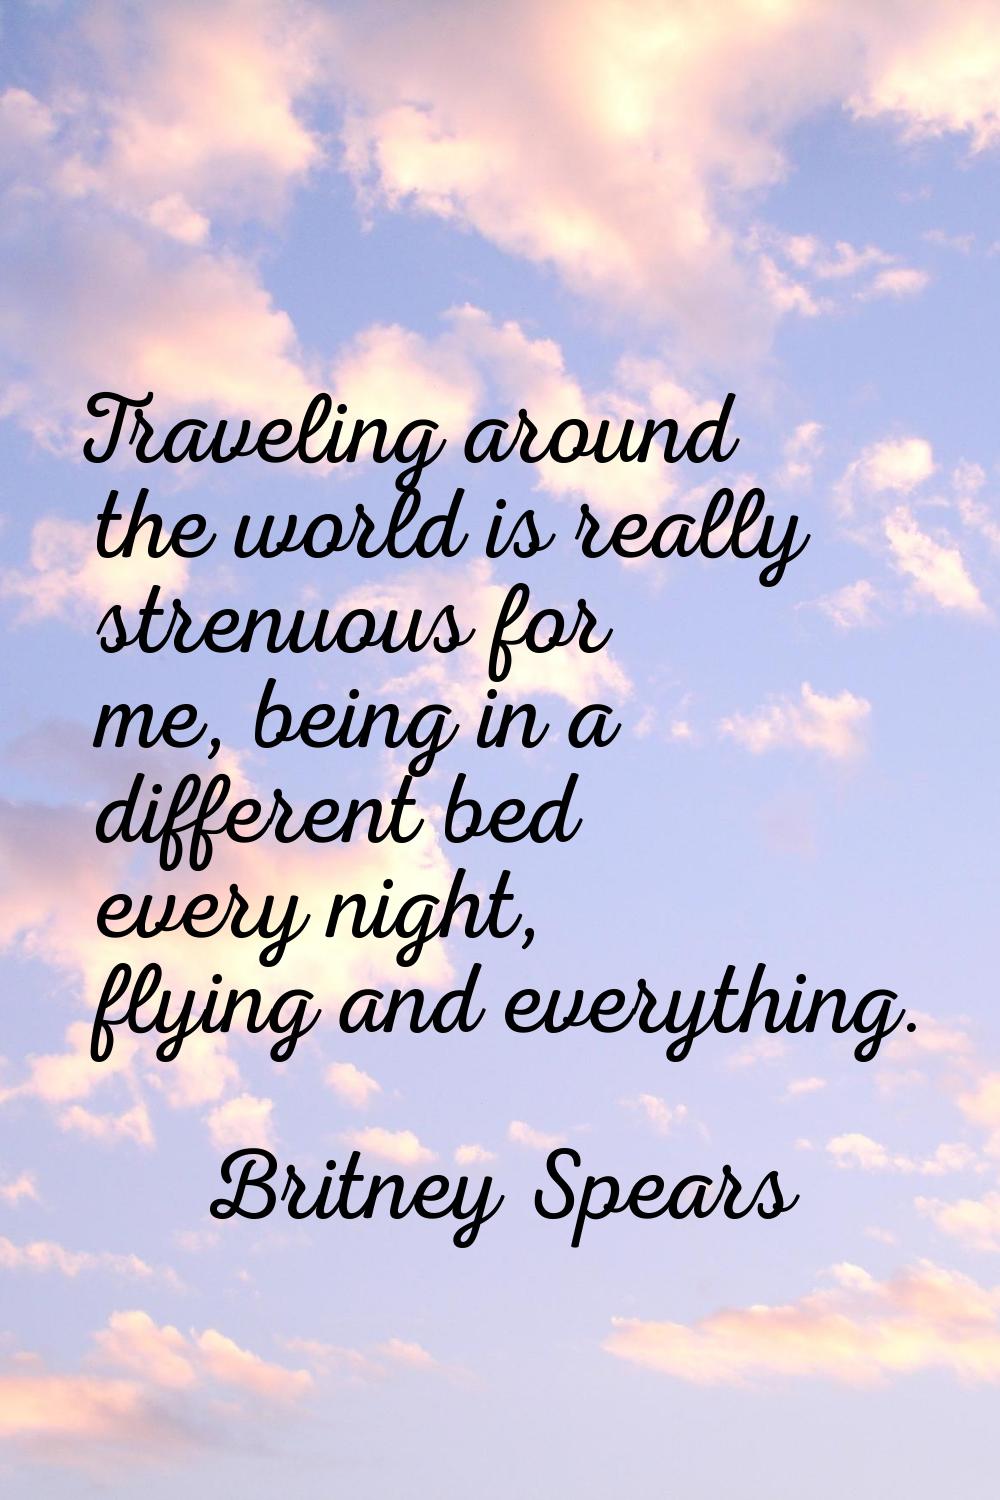 Traveling around the world is really strenuous for me, being in a different bed every night, flying